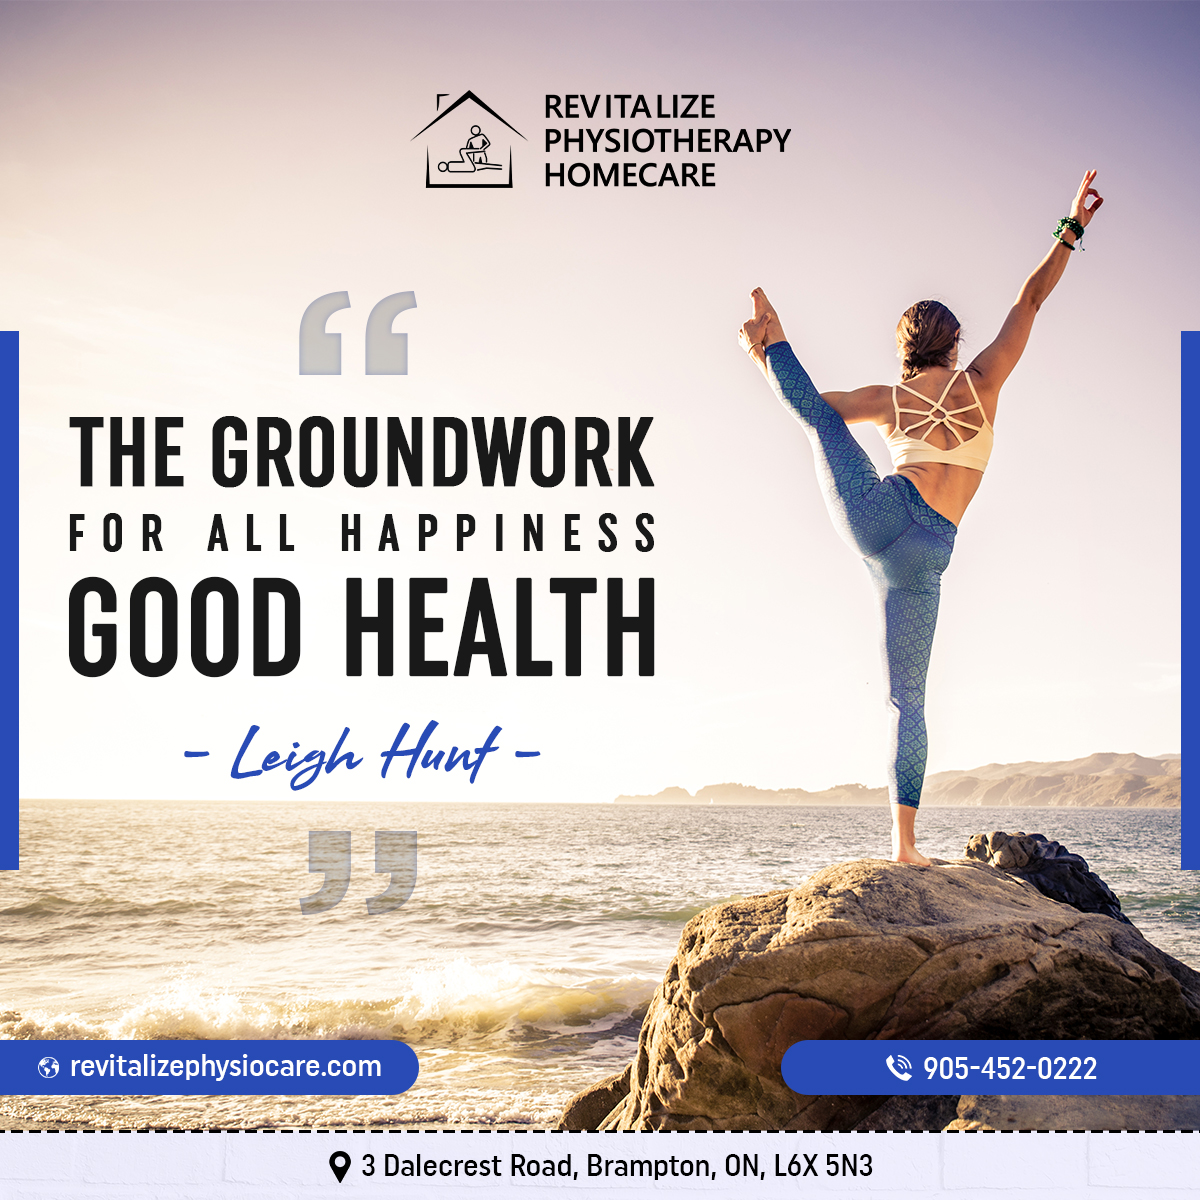 There's a lot of truth to the idea that good health is the foundation for happiness.

#RevitalizePhysiocare #healthfirst #mobilephysiotherapy #mississauga #brampton #bramptonphysiotherapist #physiotherapyathome #physiotherapy #wellness #healthfirst